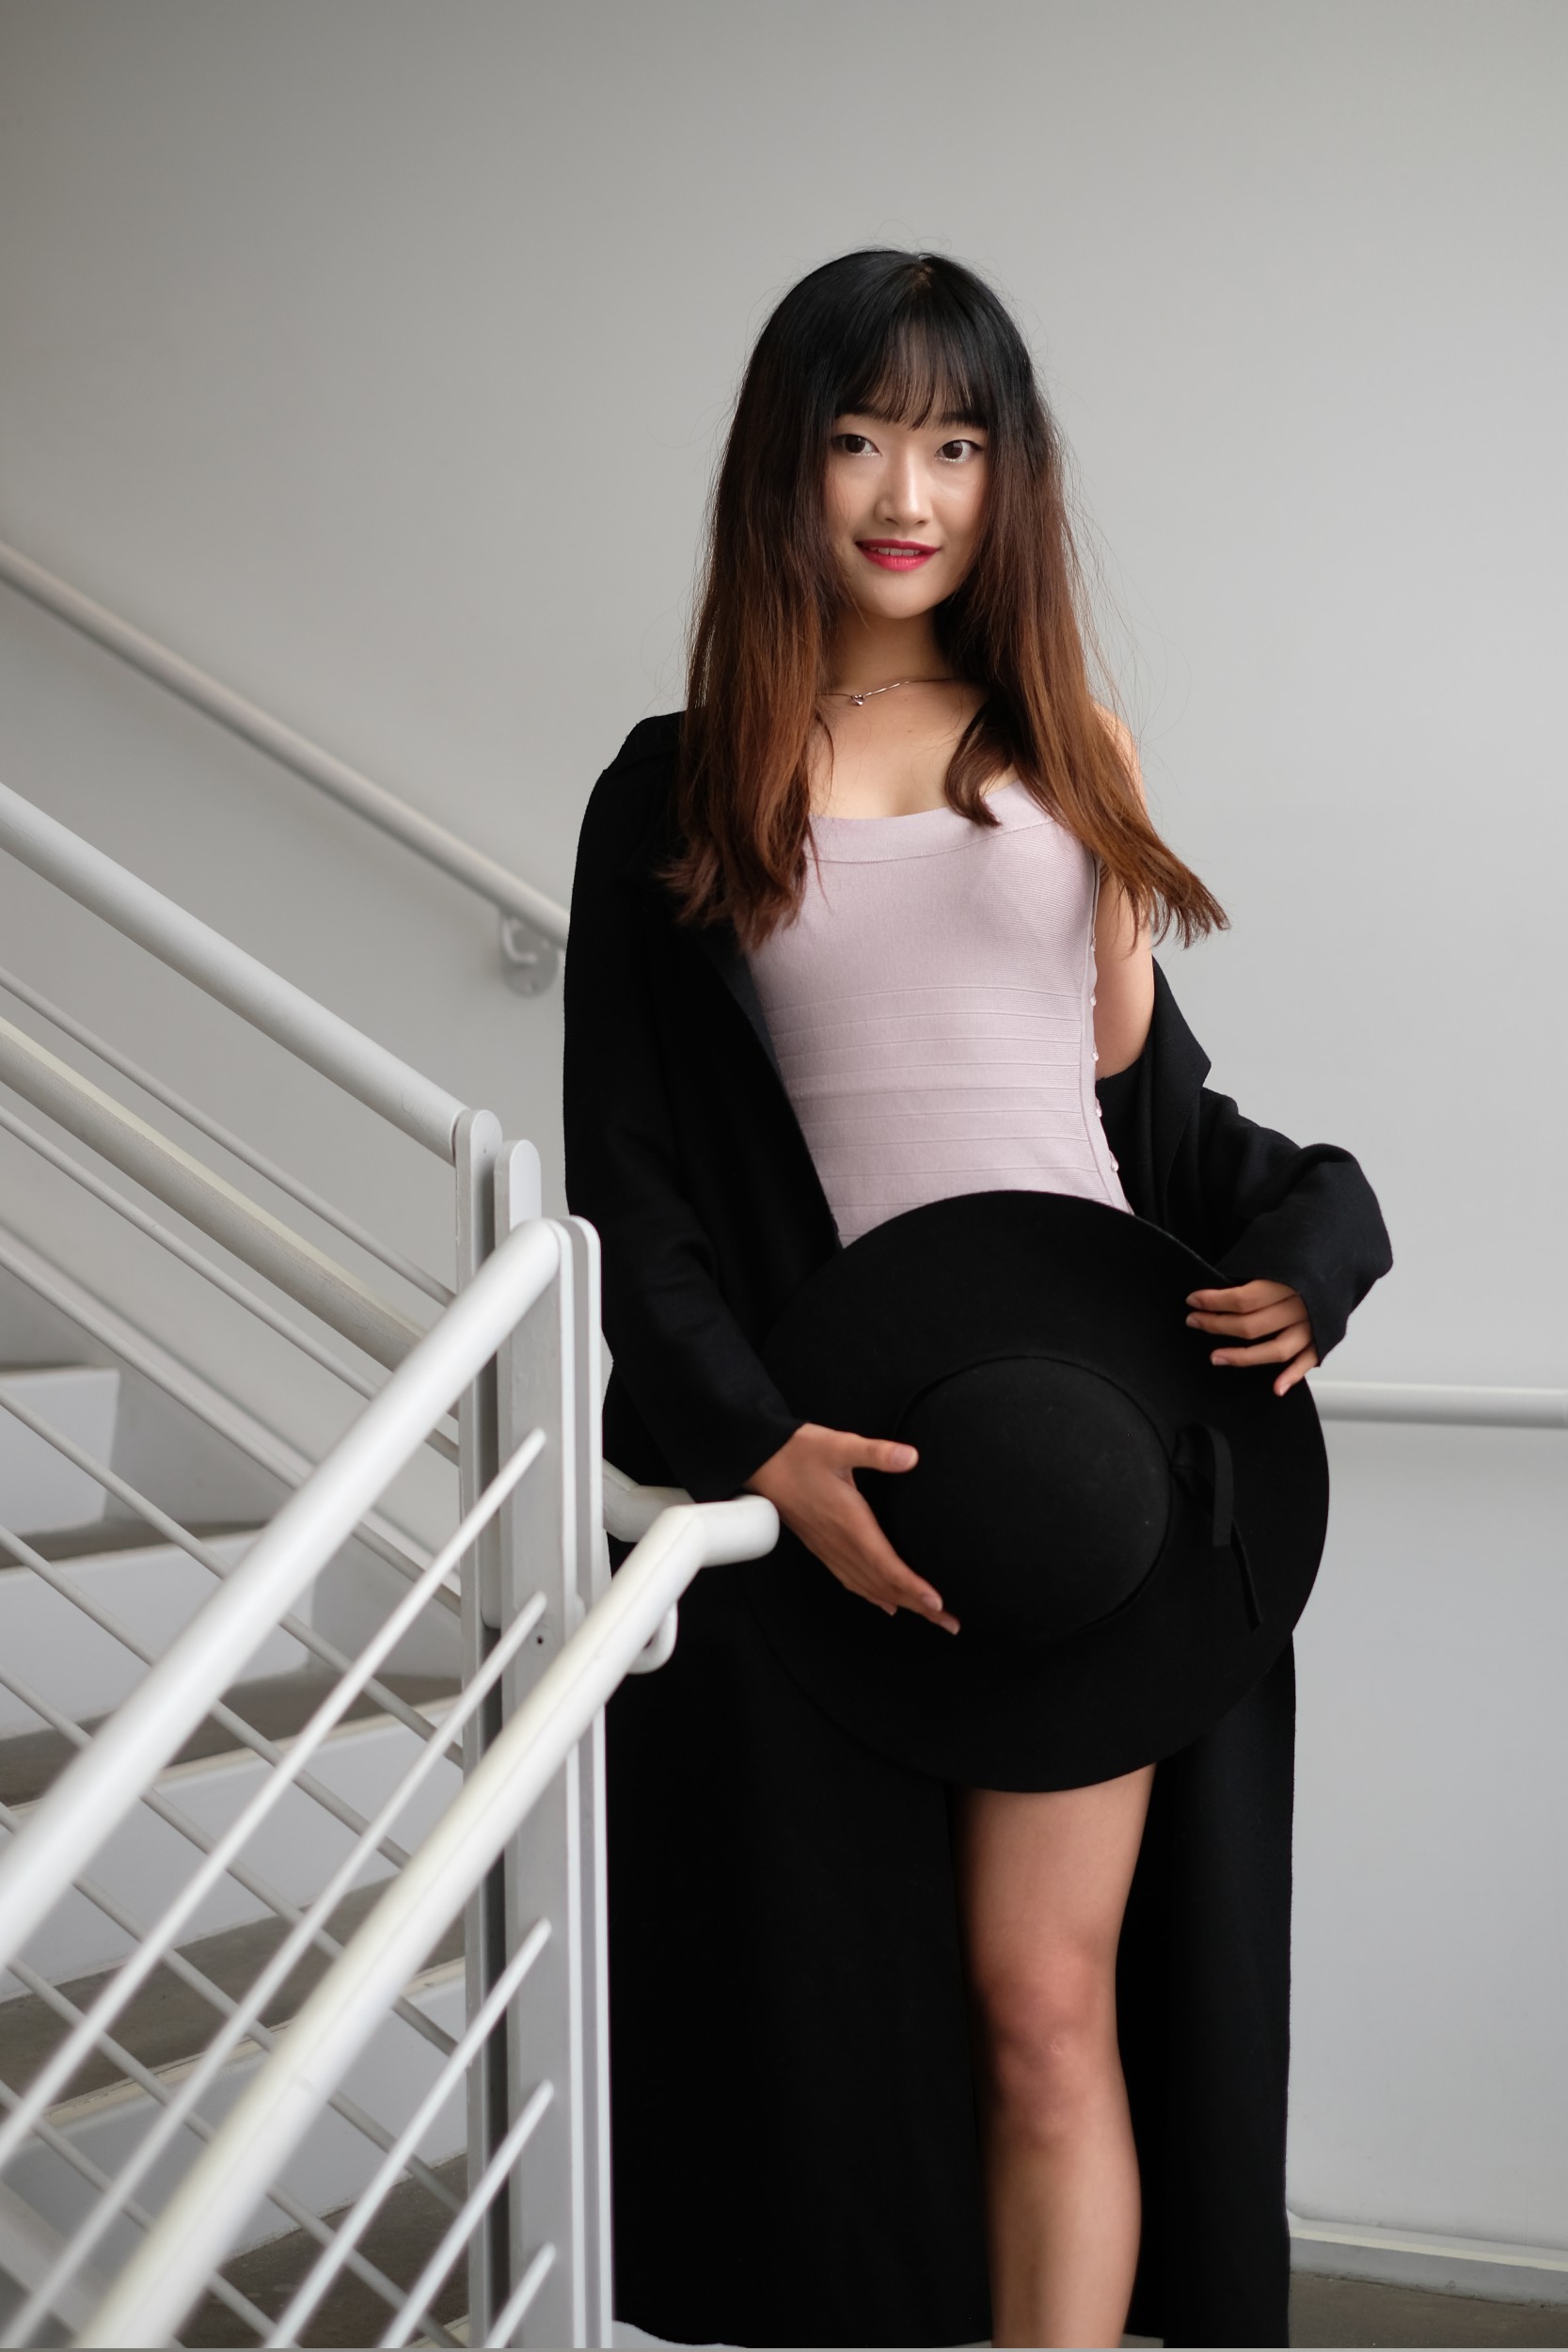 Chinese girl in black coat in stairwell